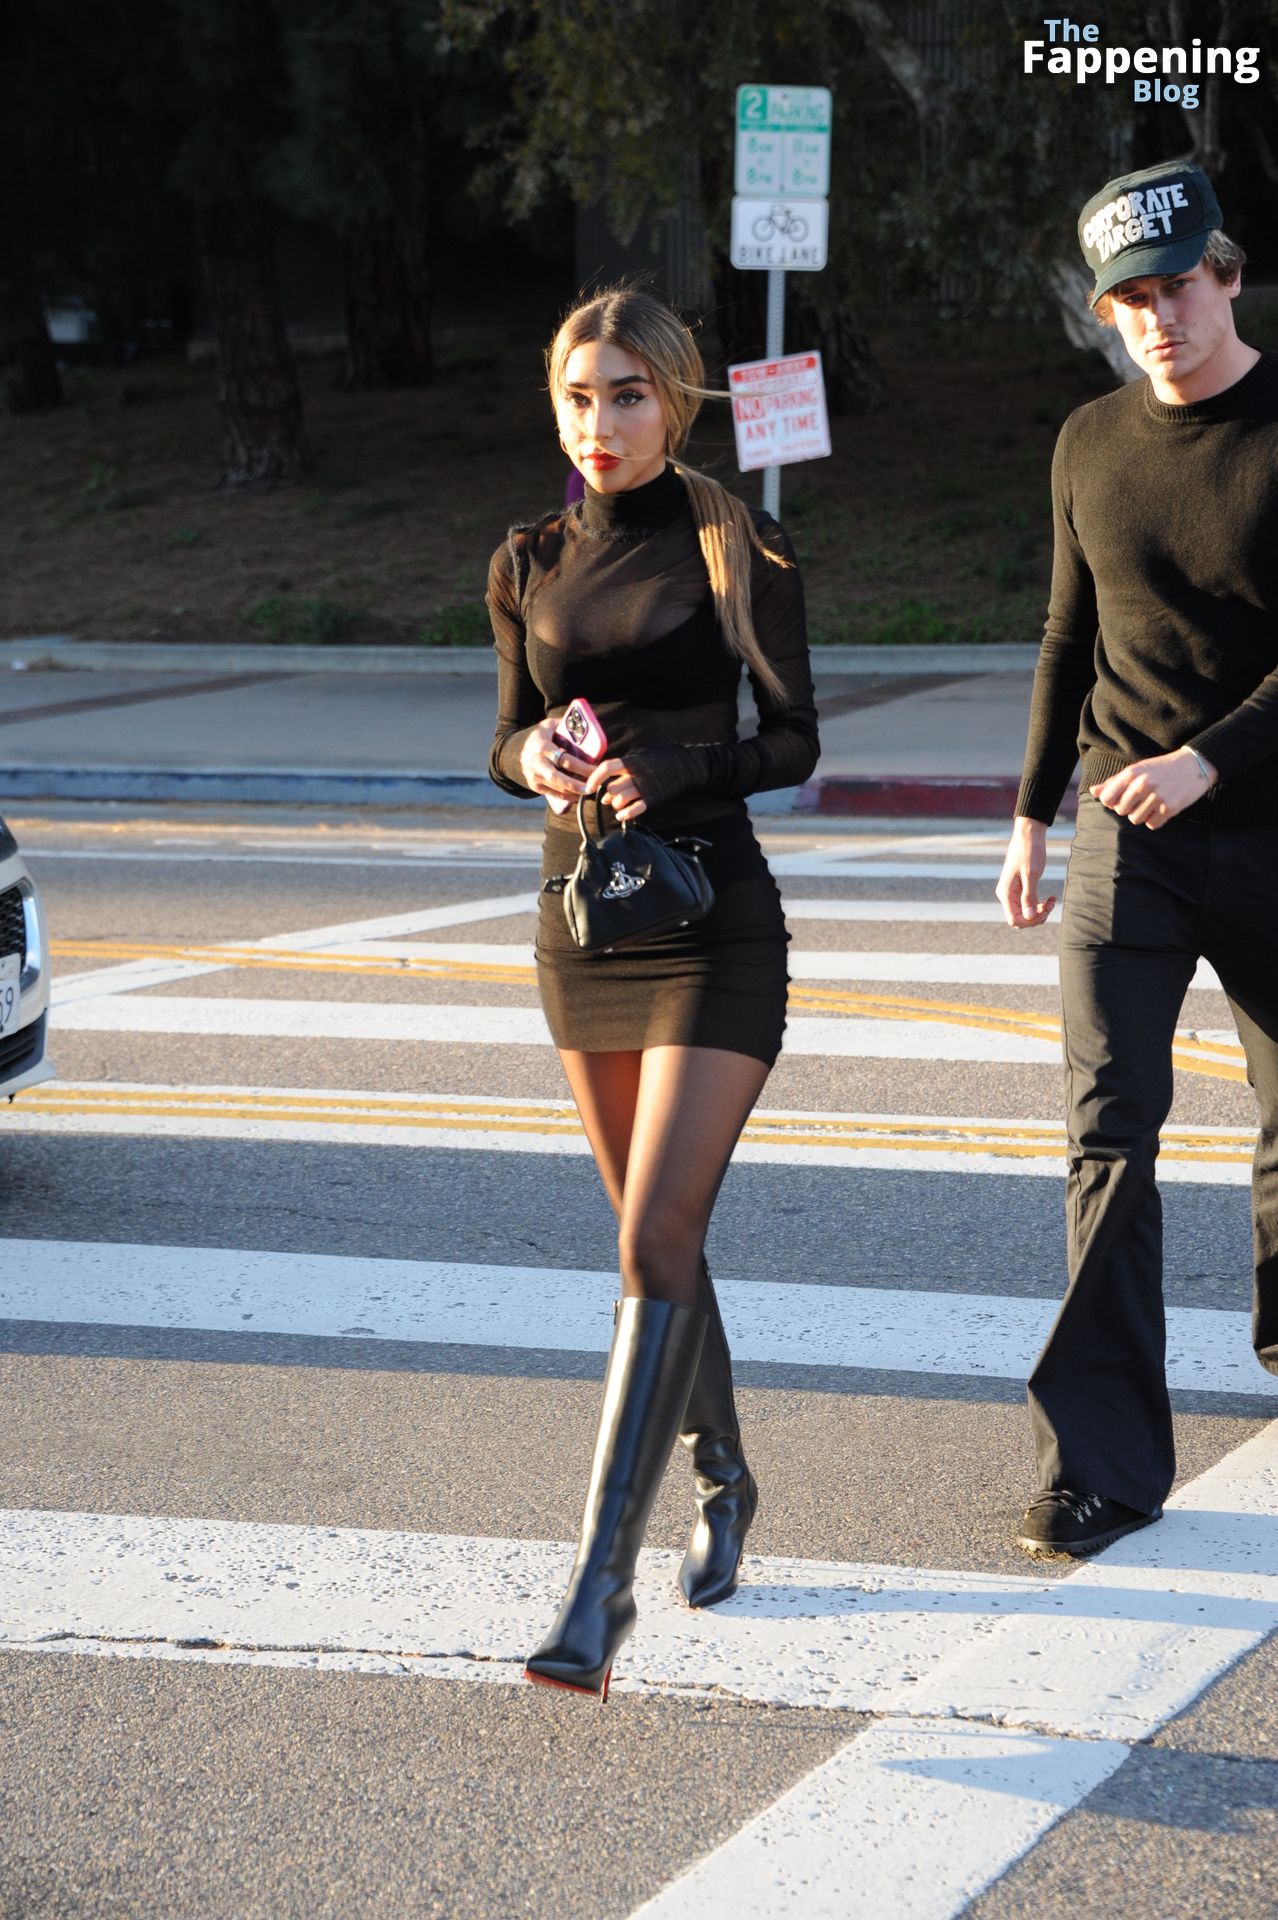 Chantel Jeffries Displays Her Beautiful Figure in a See-Through Dress at the “AIR” Premiere in LA (46 Photos)